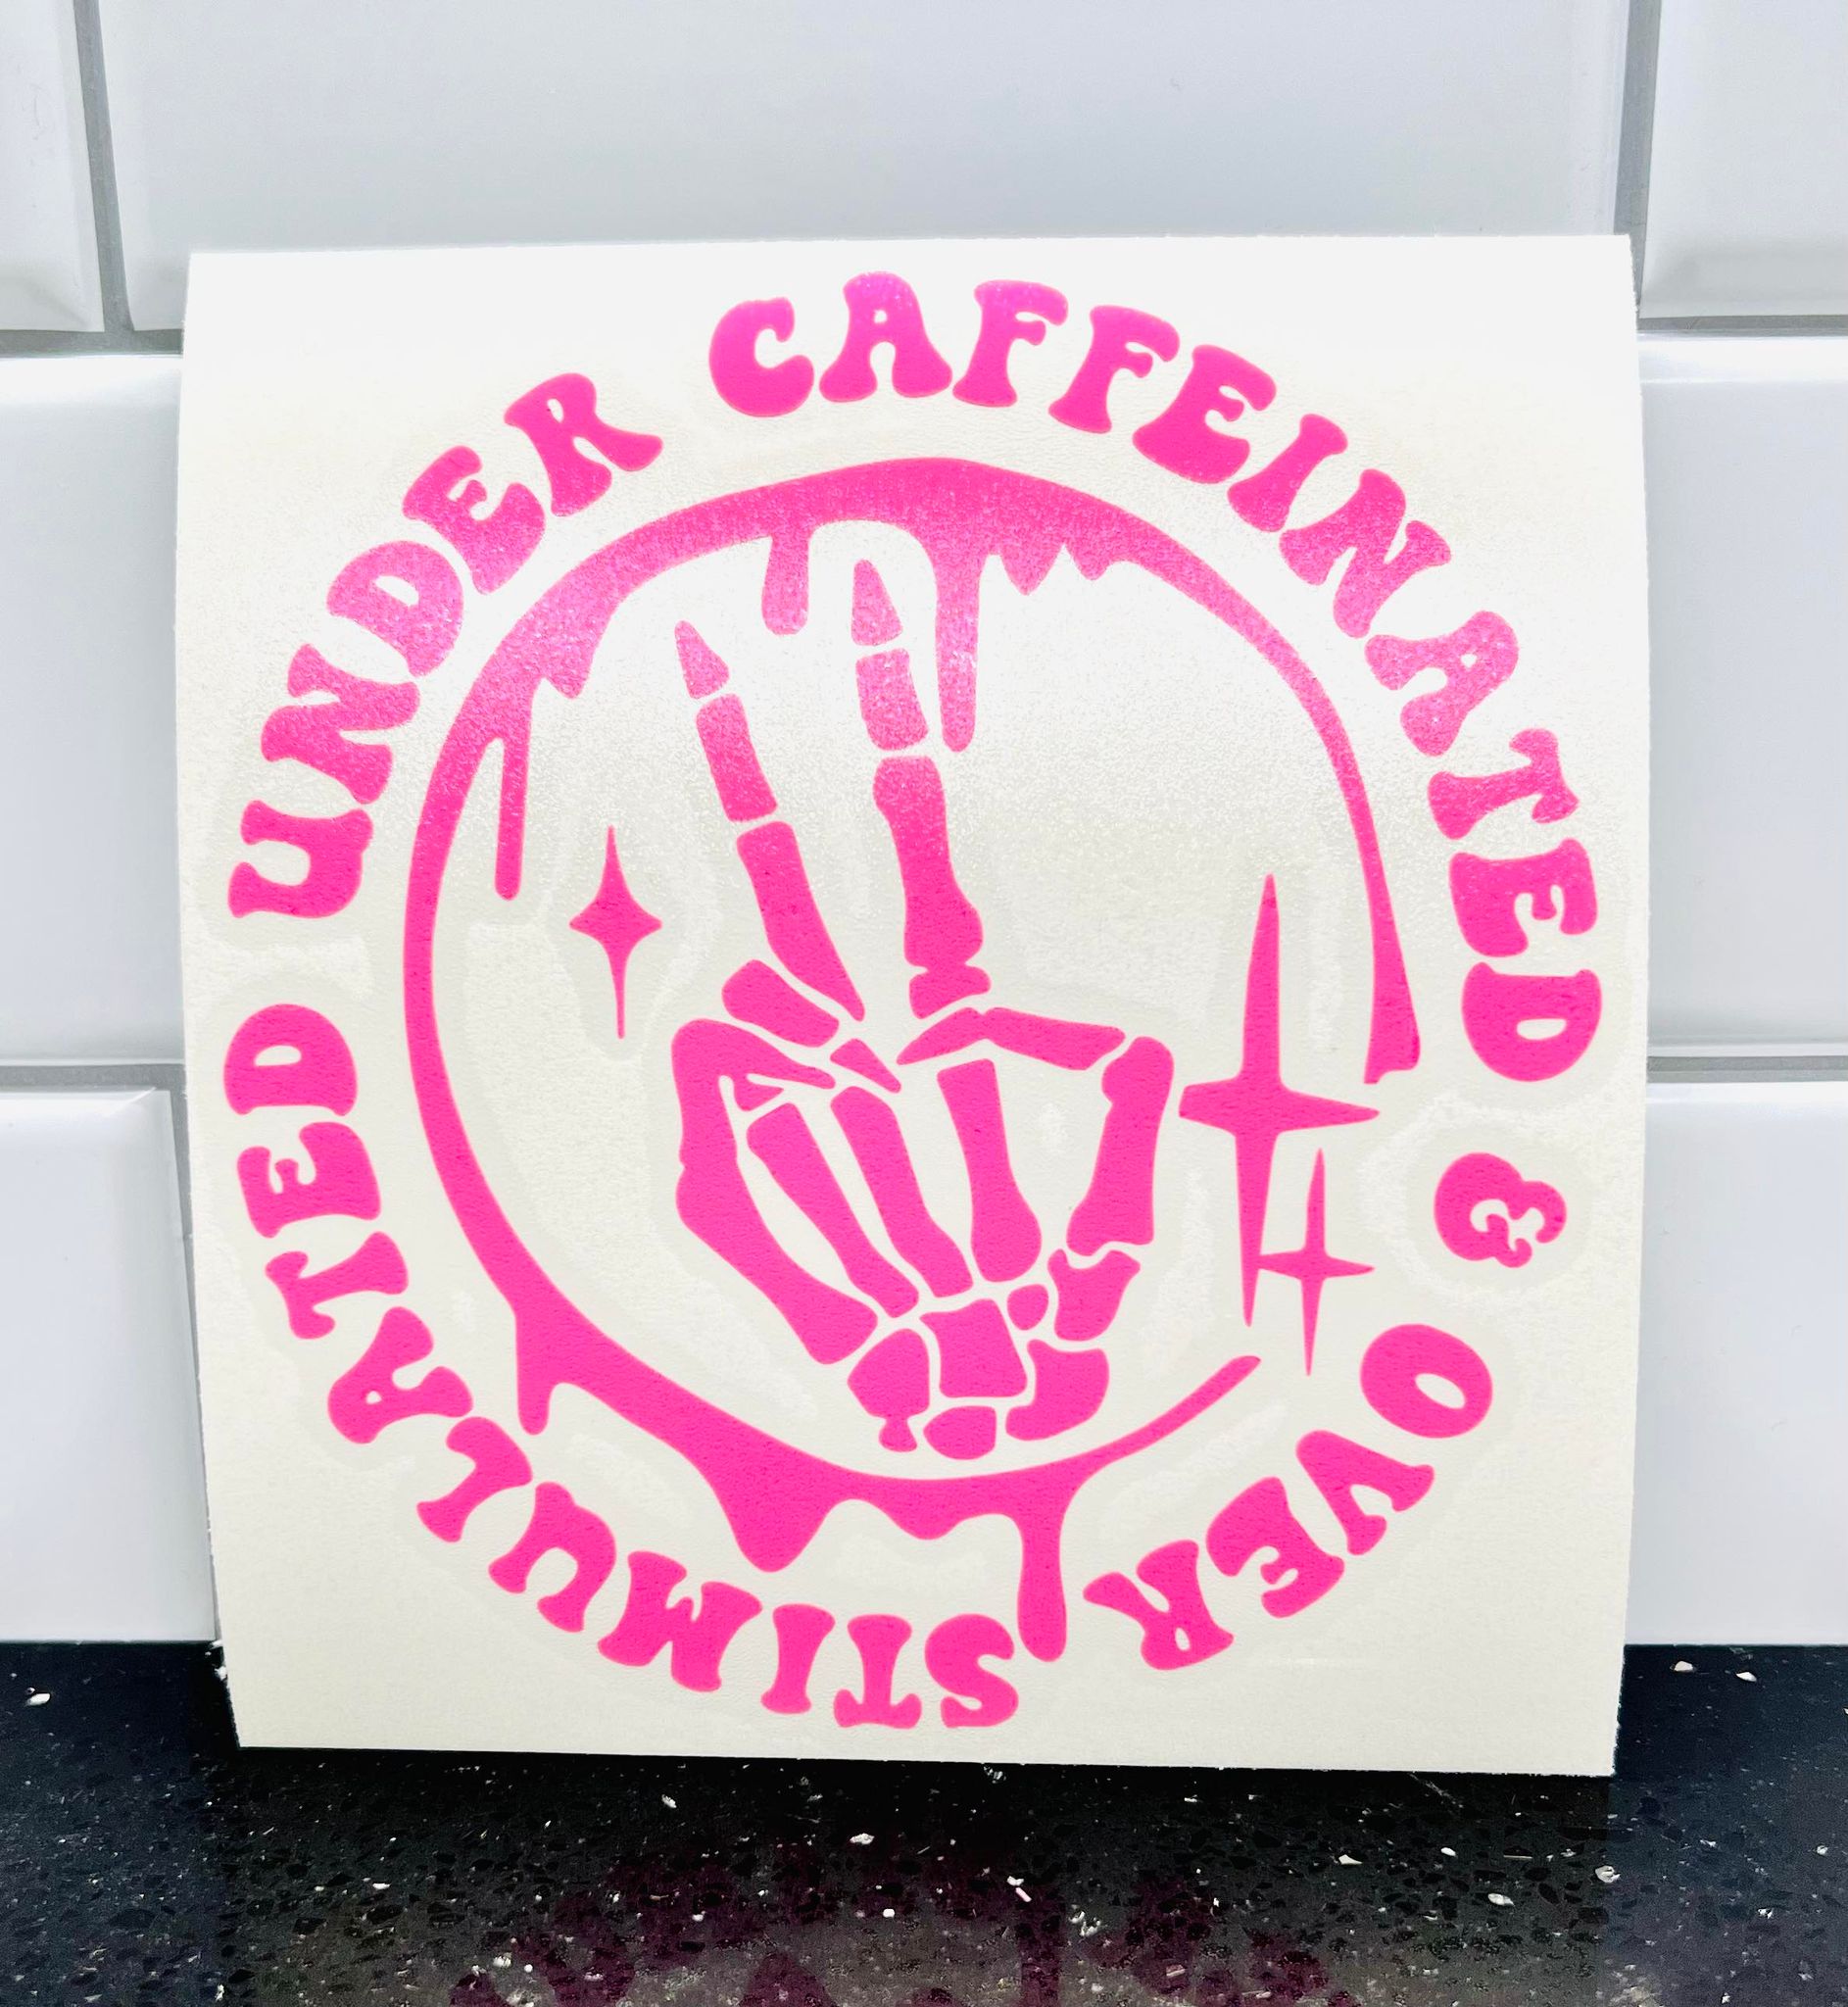 Under Caffeinated & Over Stimulated Decal